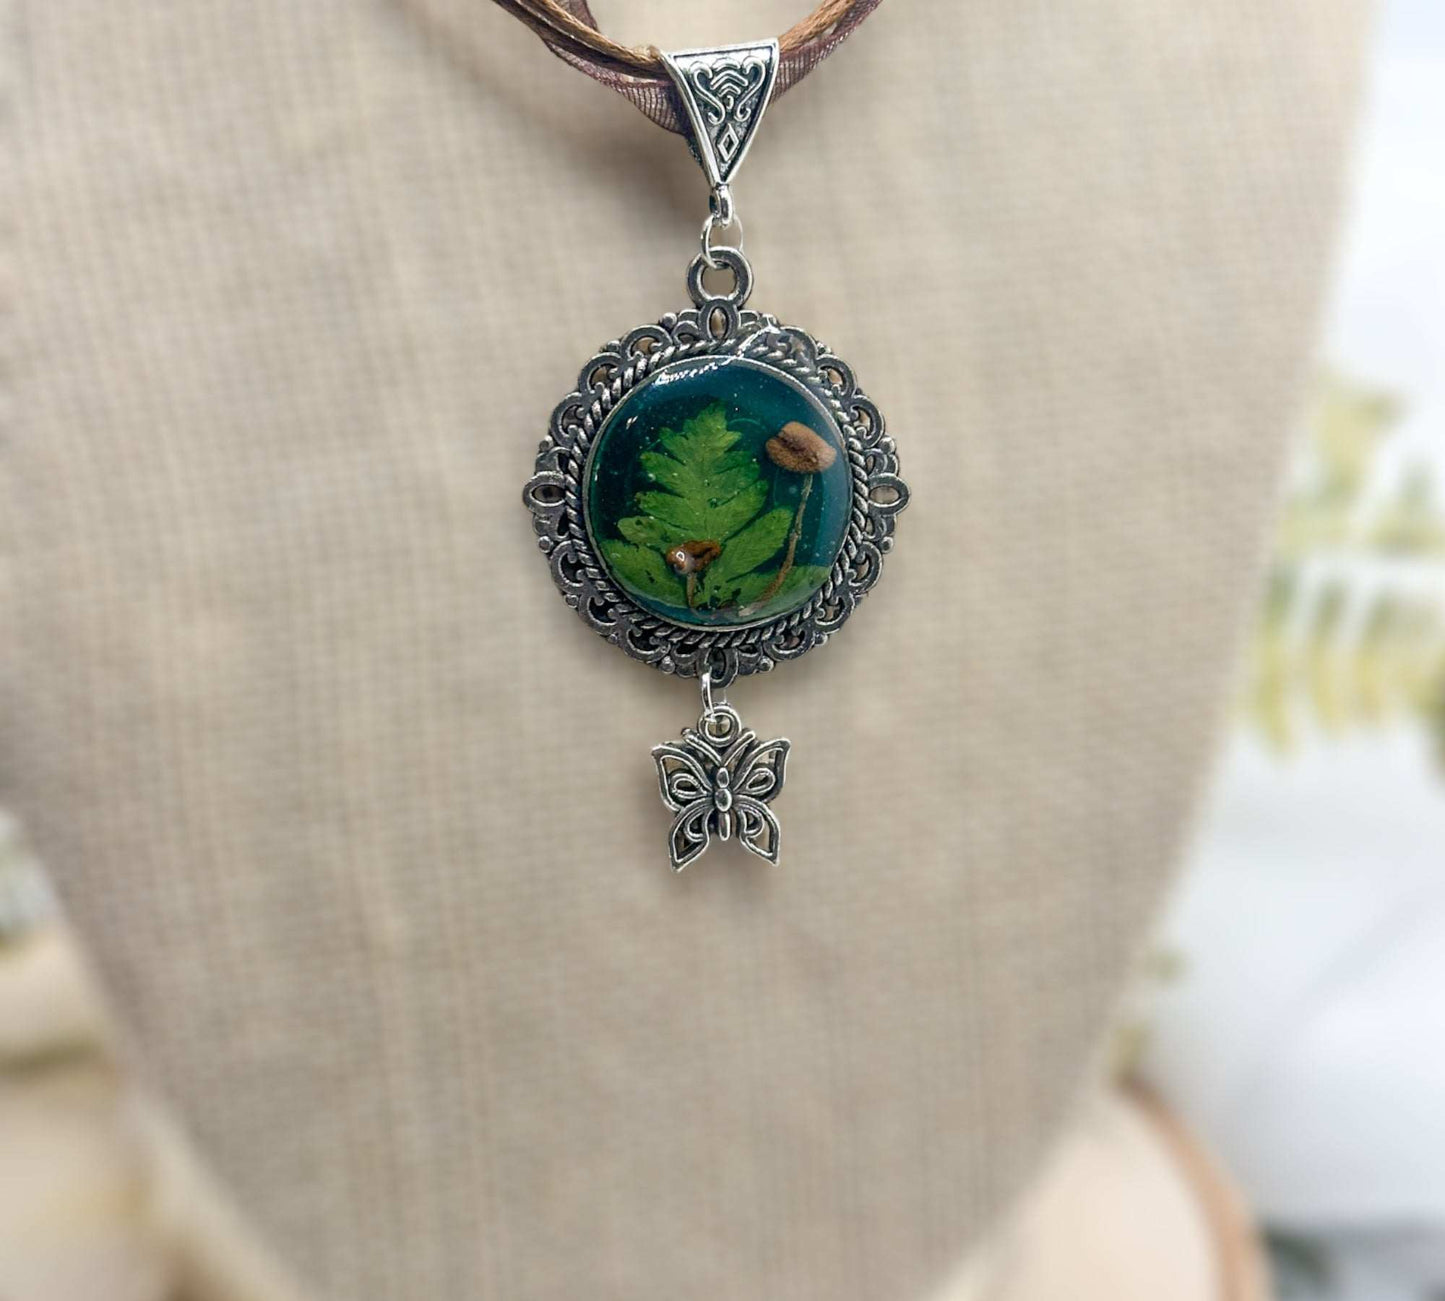 Mushroom Pendant - Magical Green Forest with Silver Butterfly